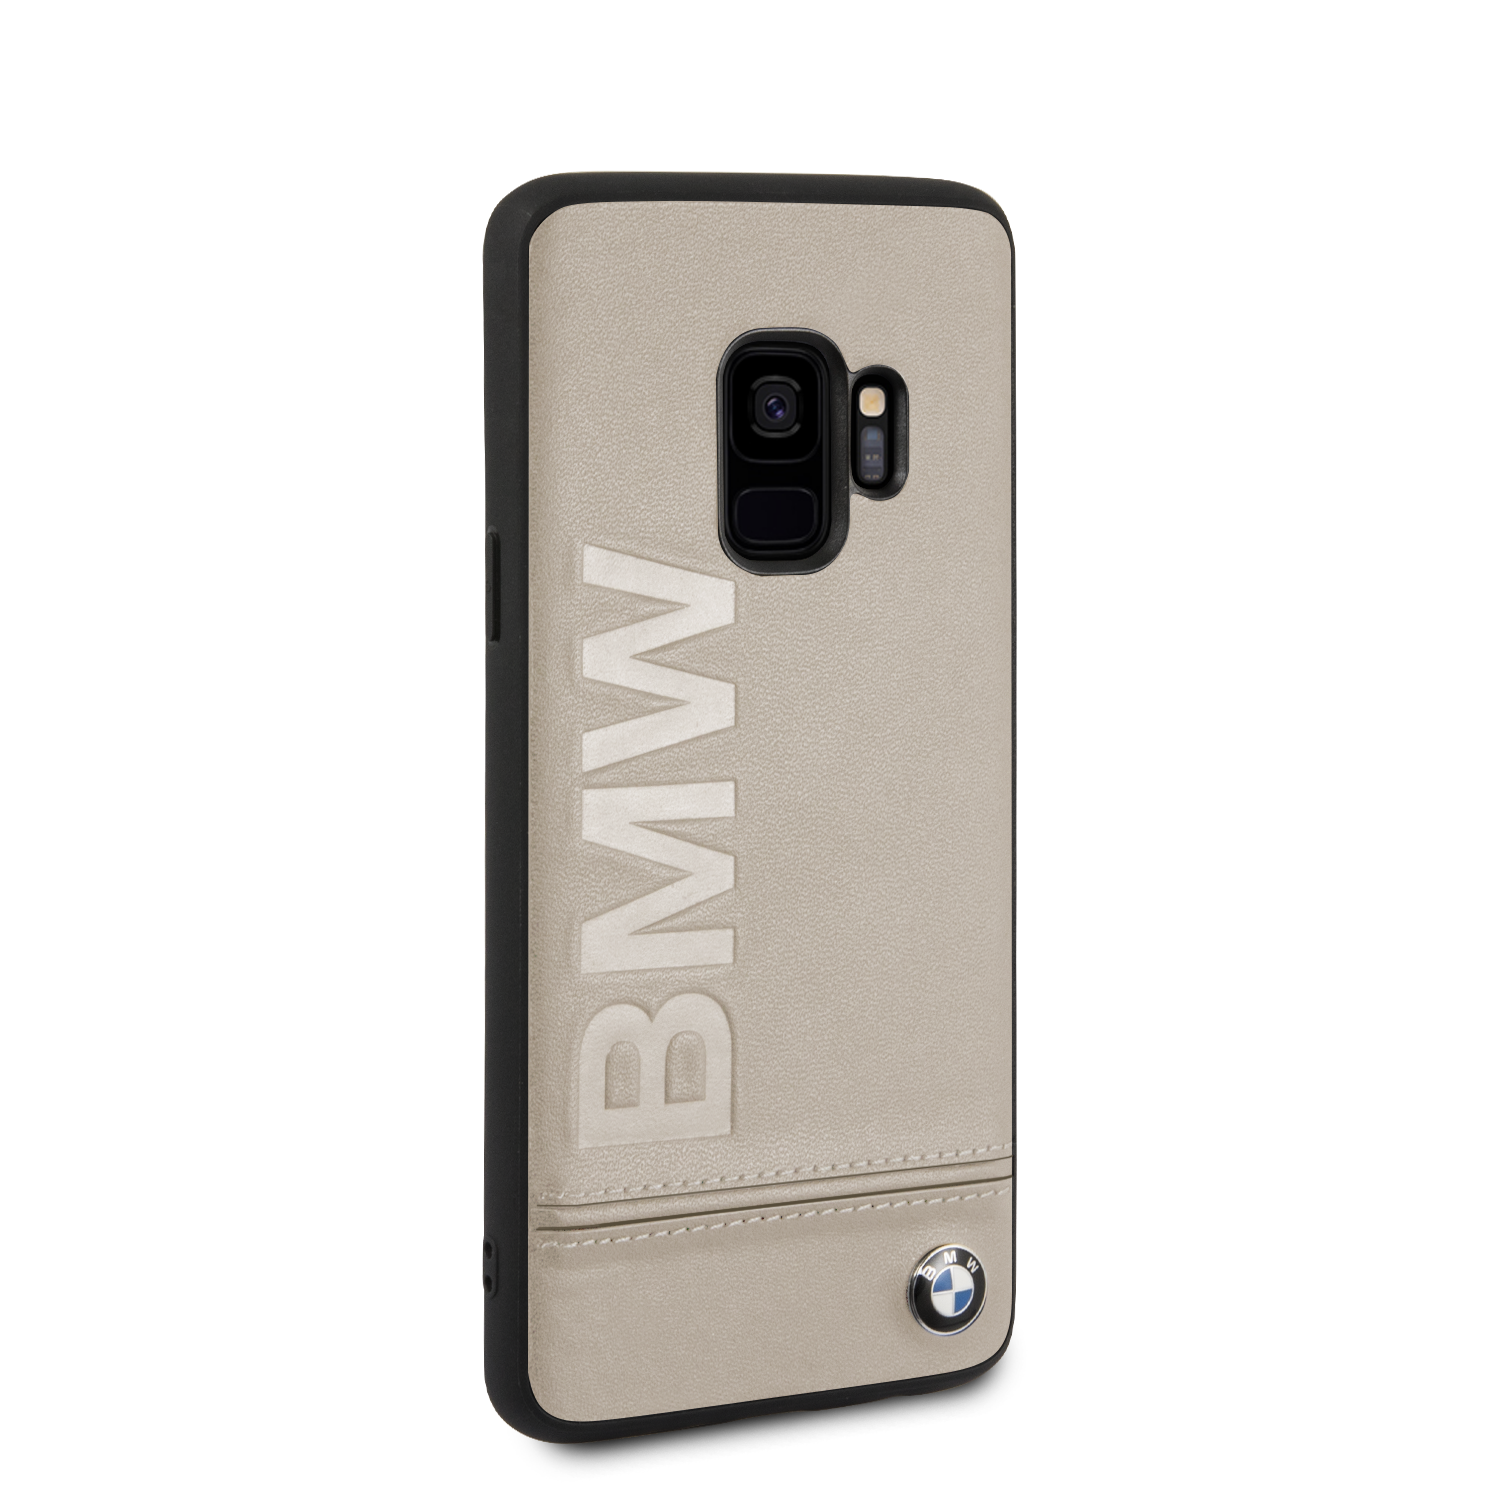 gemeenschap Inschrijven wijsvinger Official BMW Mobile Phone Cases and covers For iPhone and Samsung – Tagged " Samsung"– CG Mobile